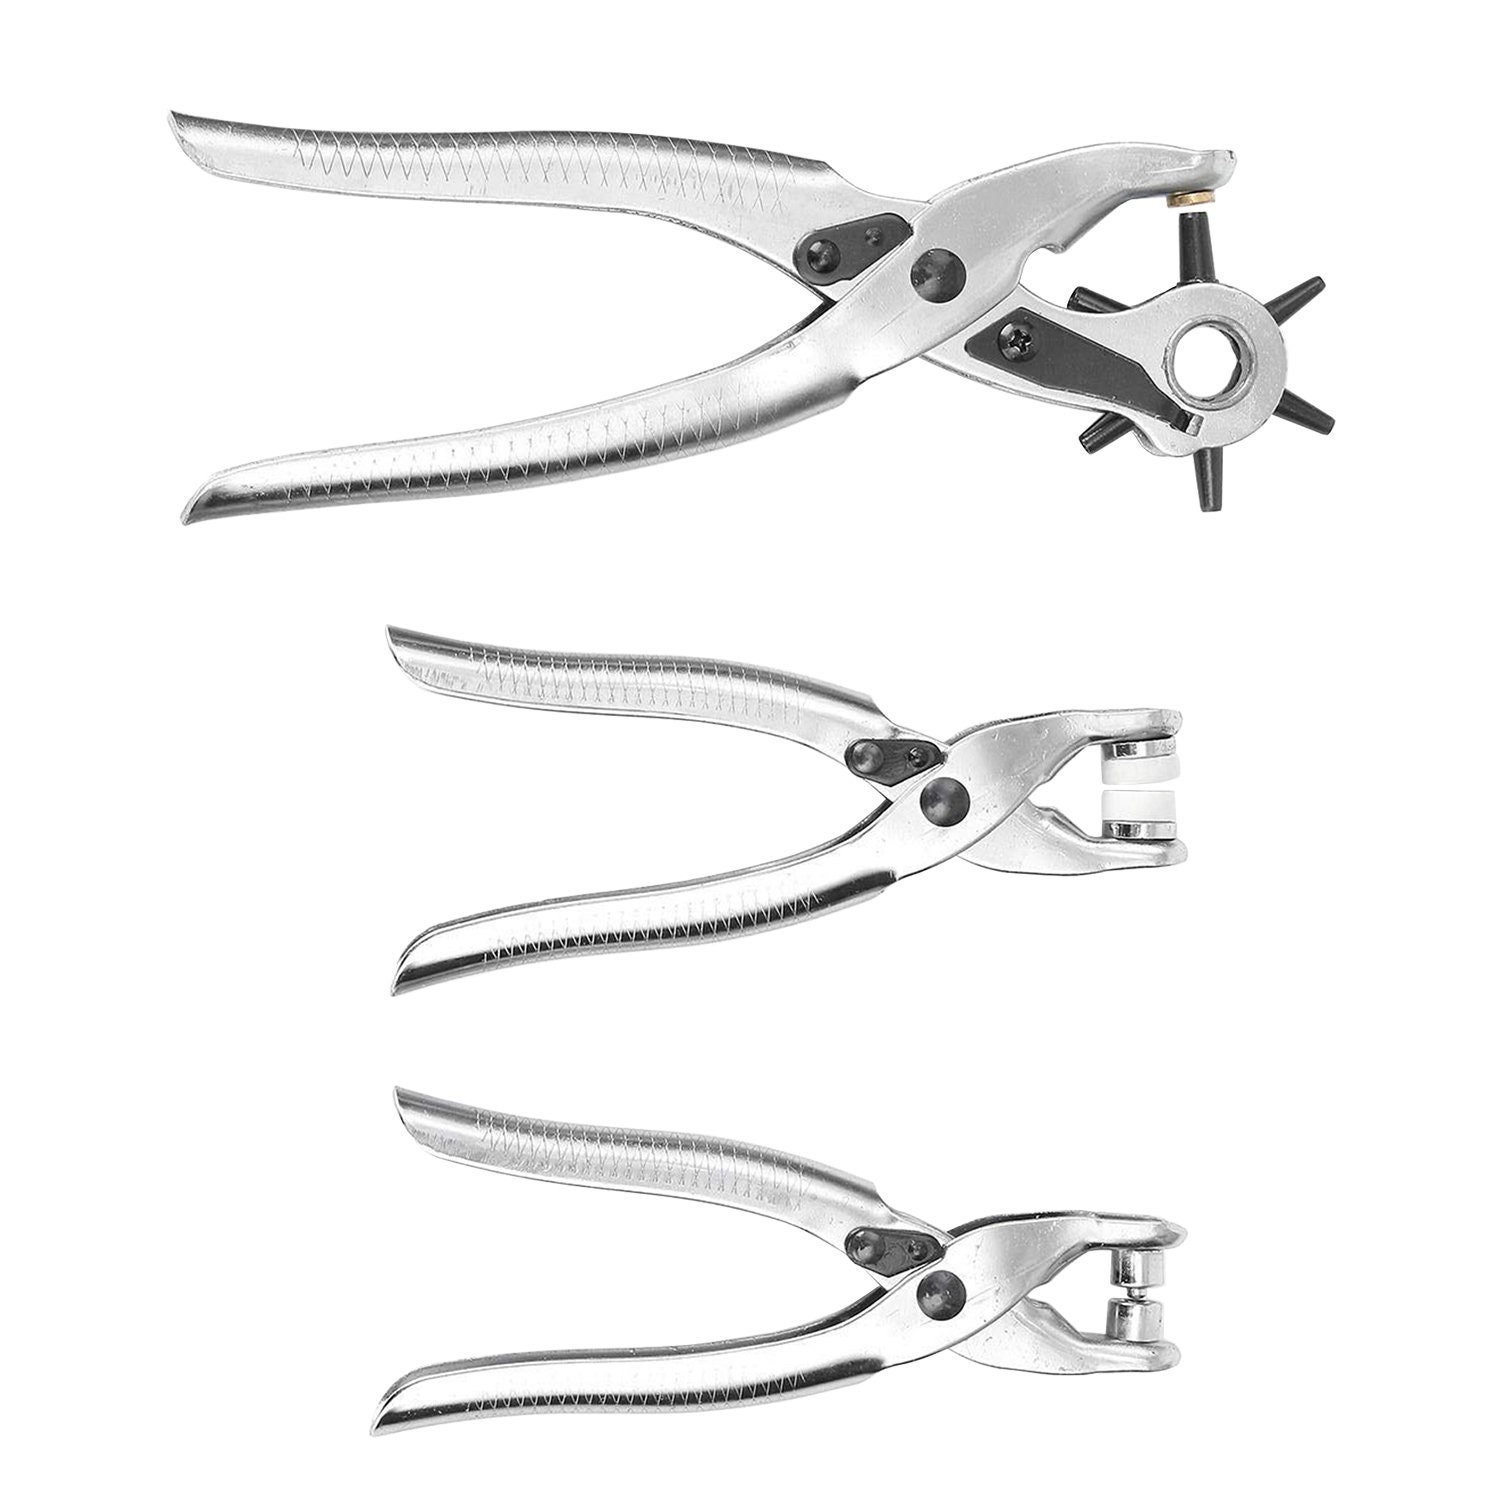 Rivets Eyelet Hole Punch Pliers Hand Tool + 100pcs Easy Press